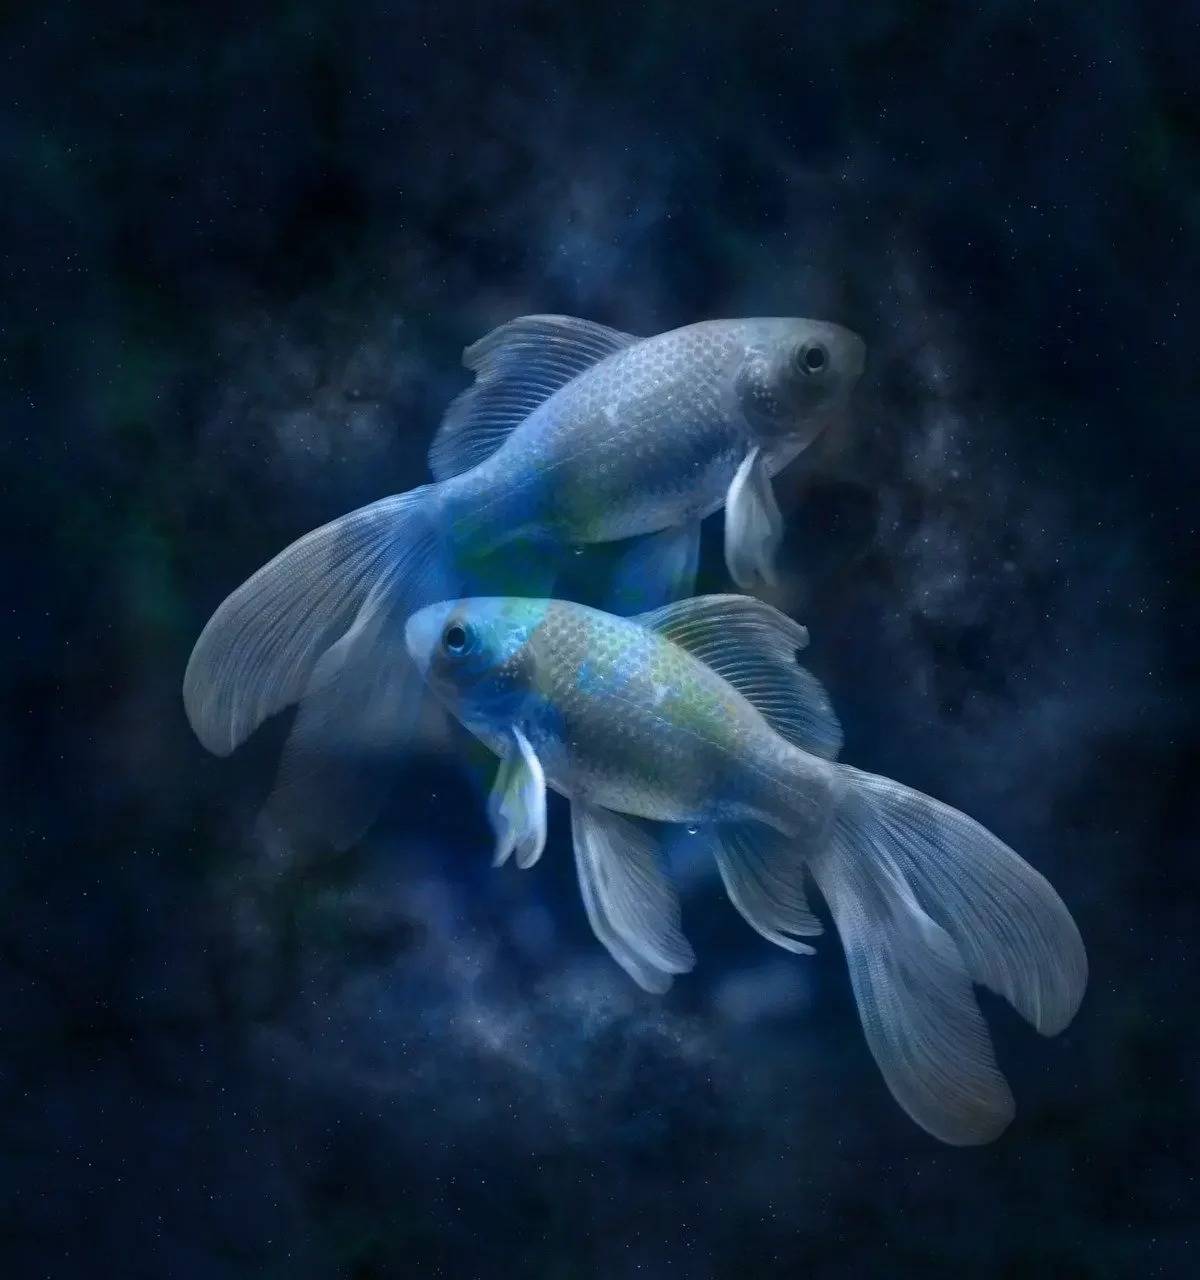 Pisces (19 February - 20 March)